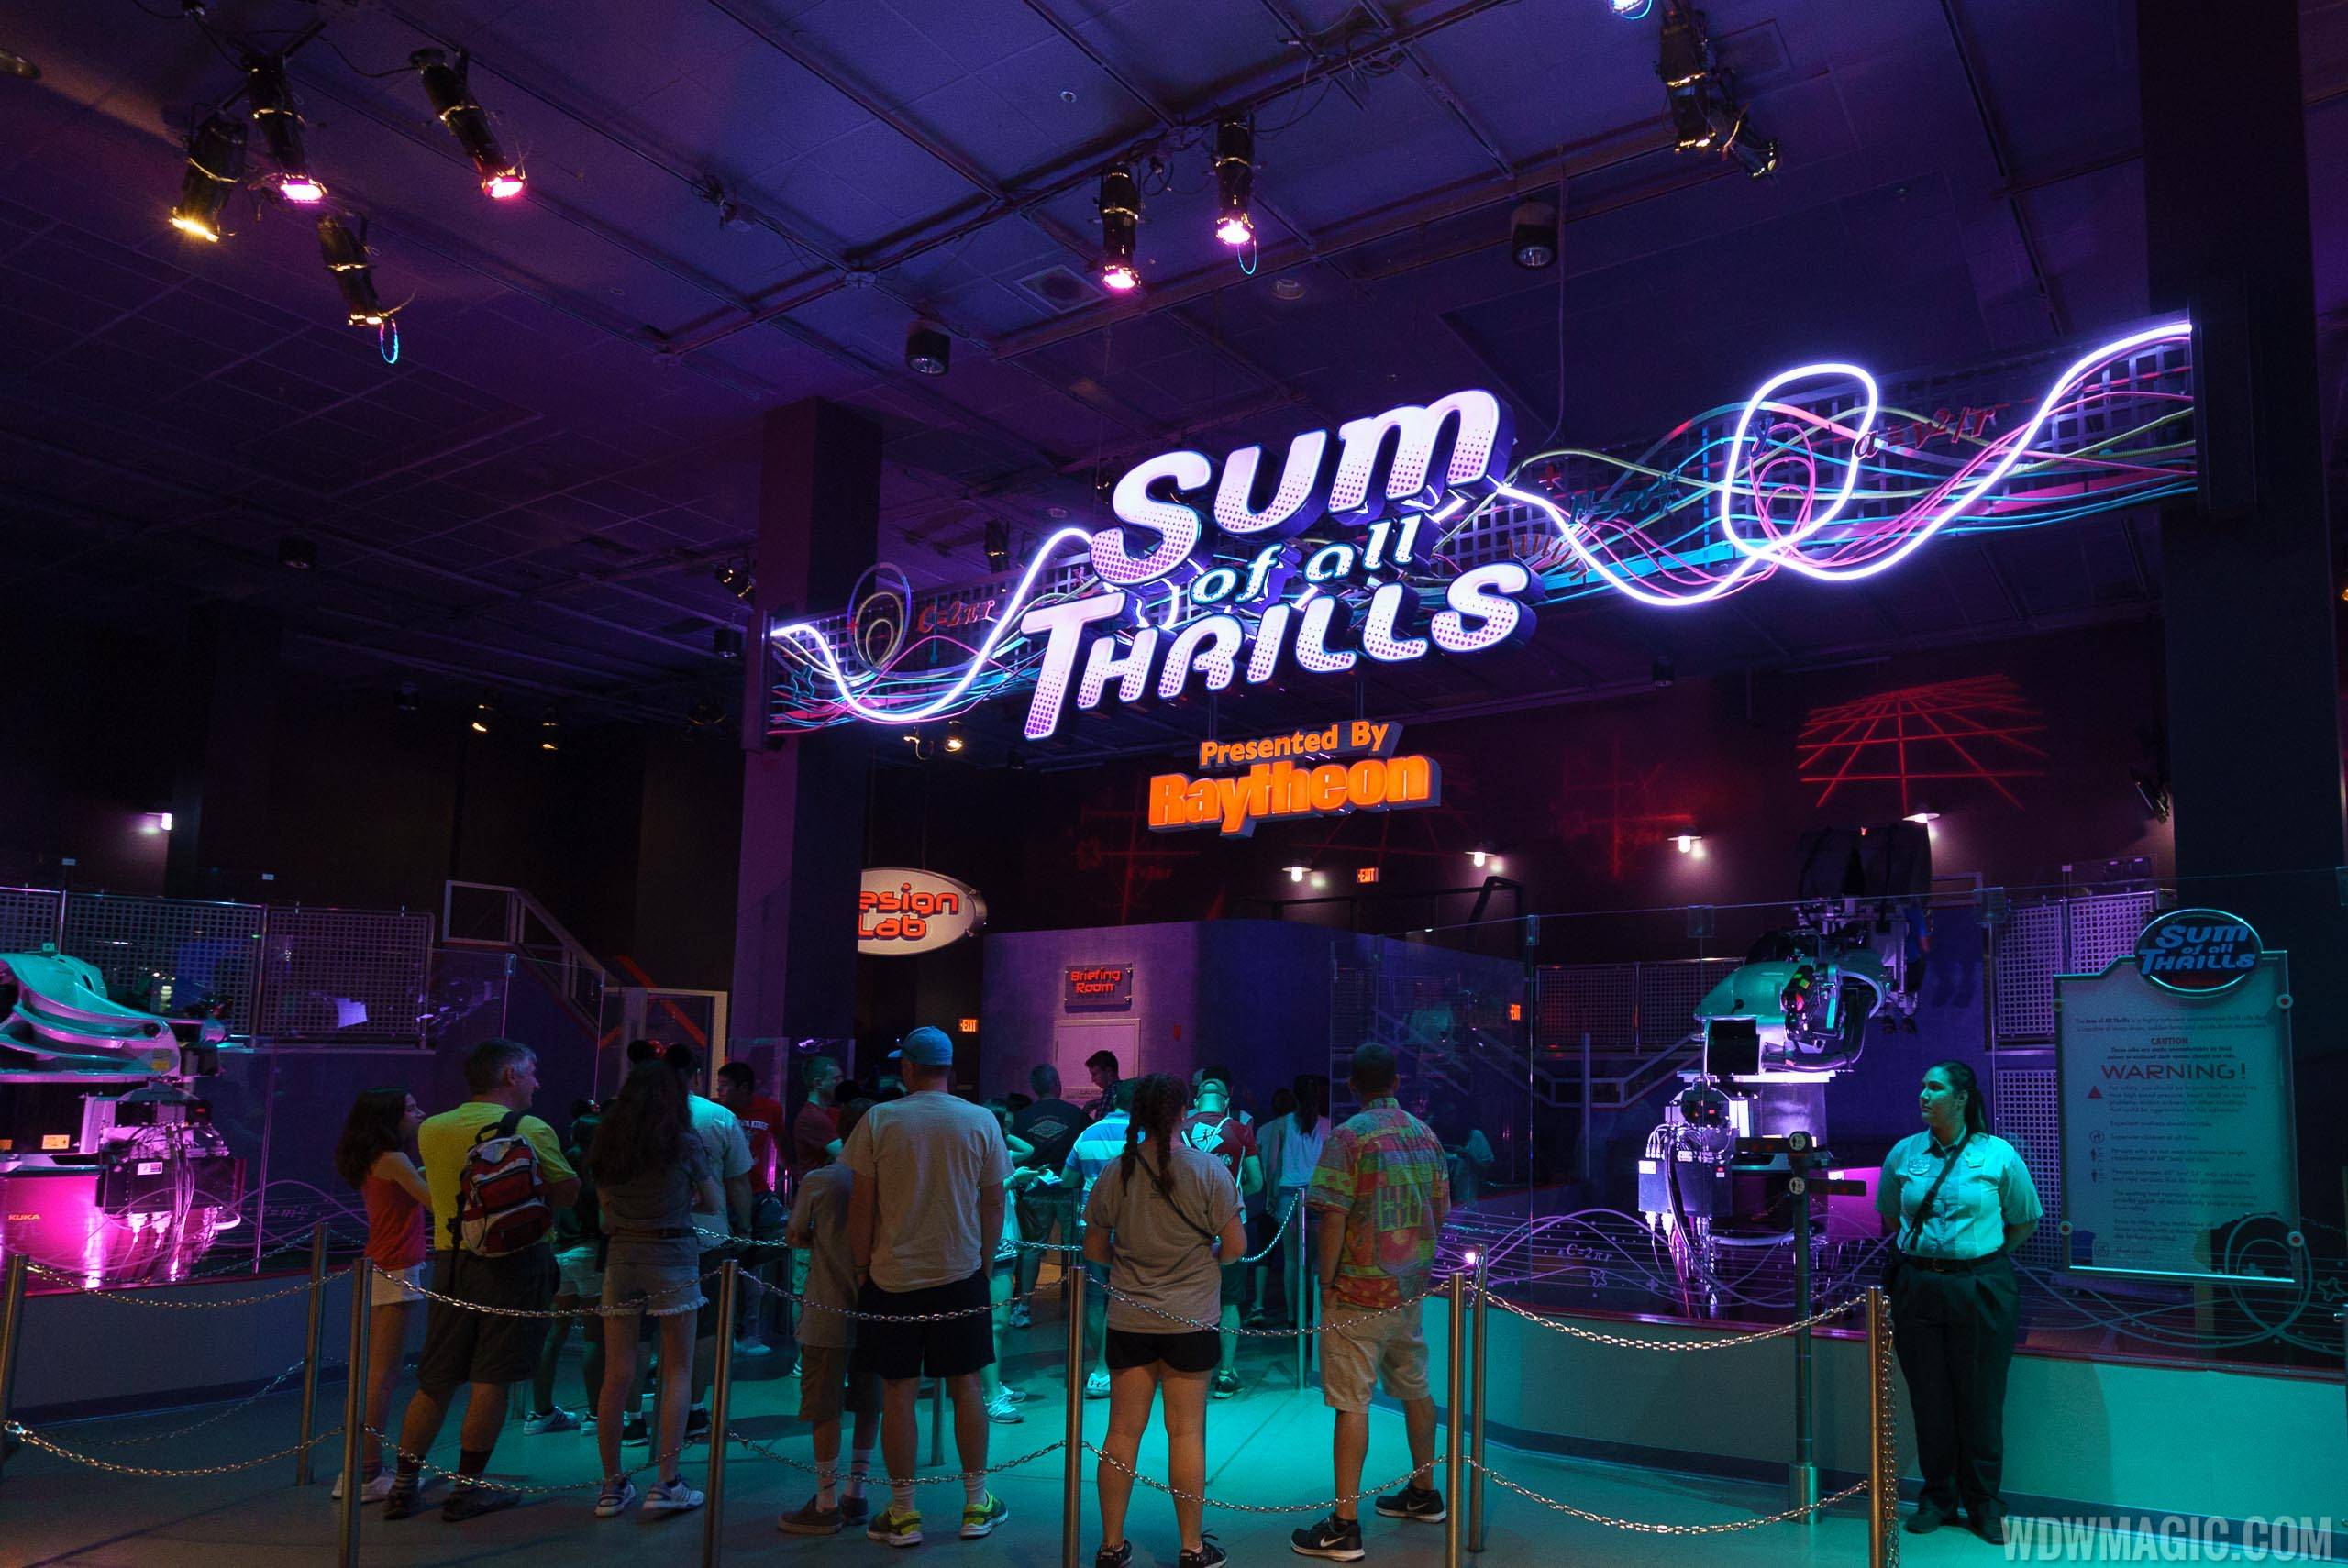 Is Epcot's Sum of All Thrills set to close?